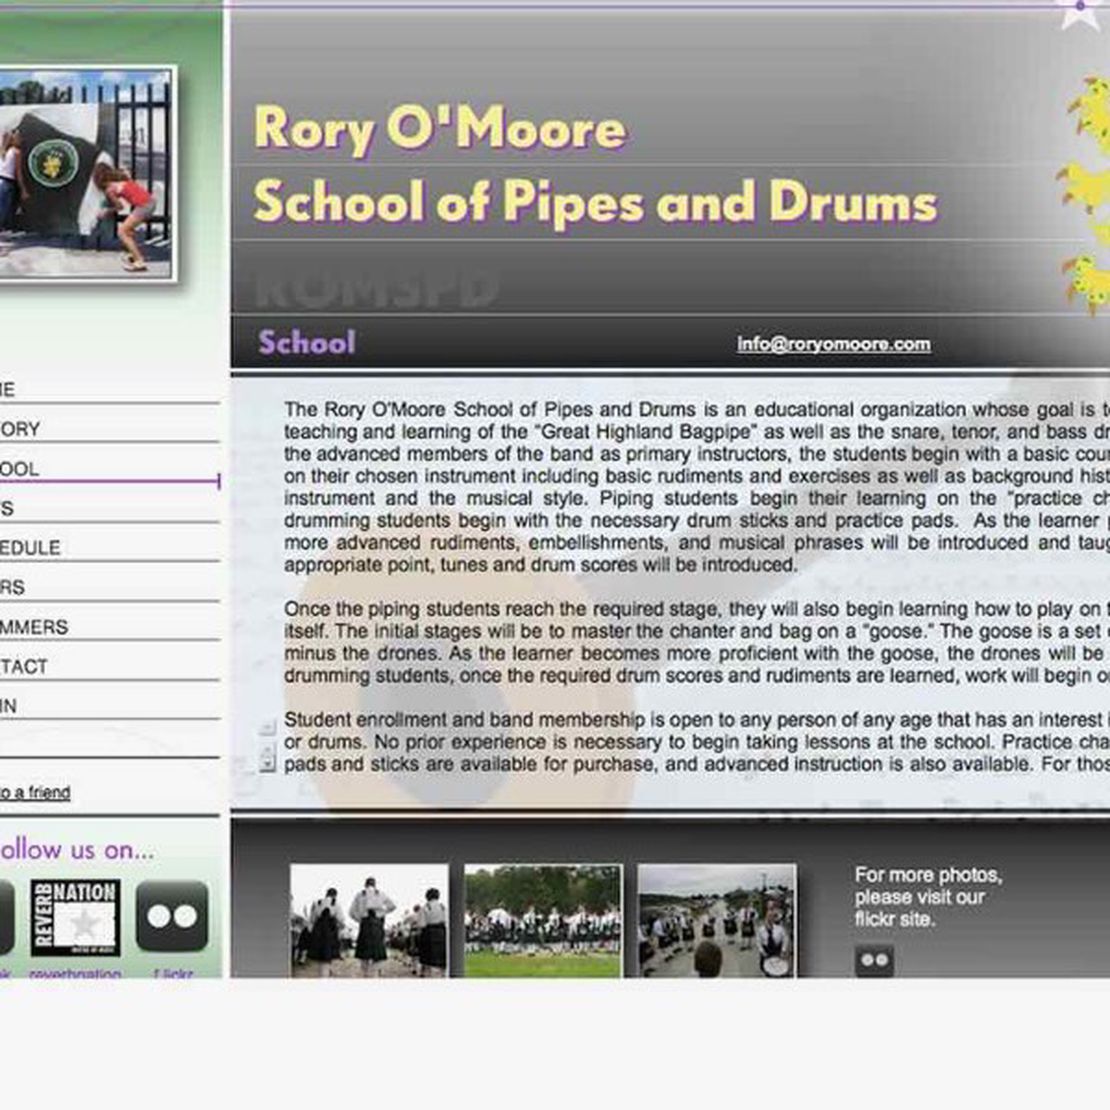 rory o' moore pipes and drums